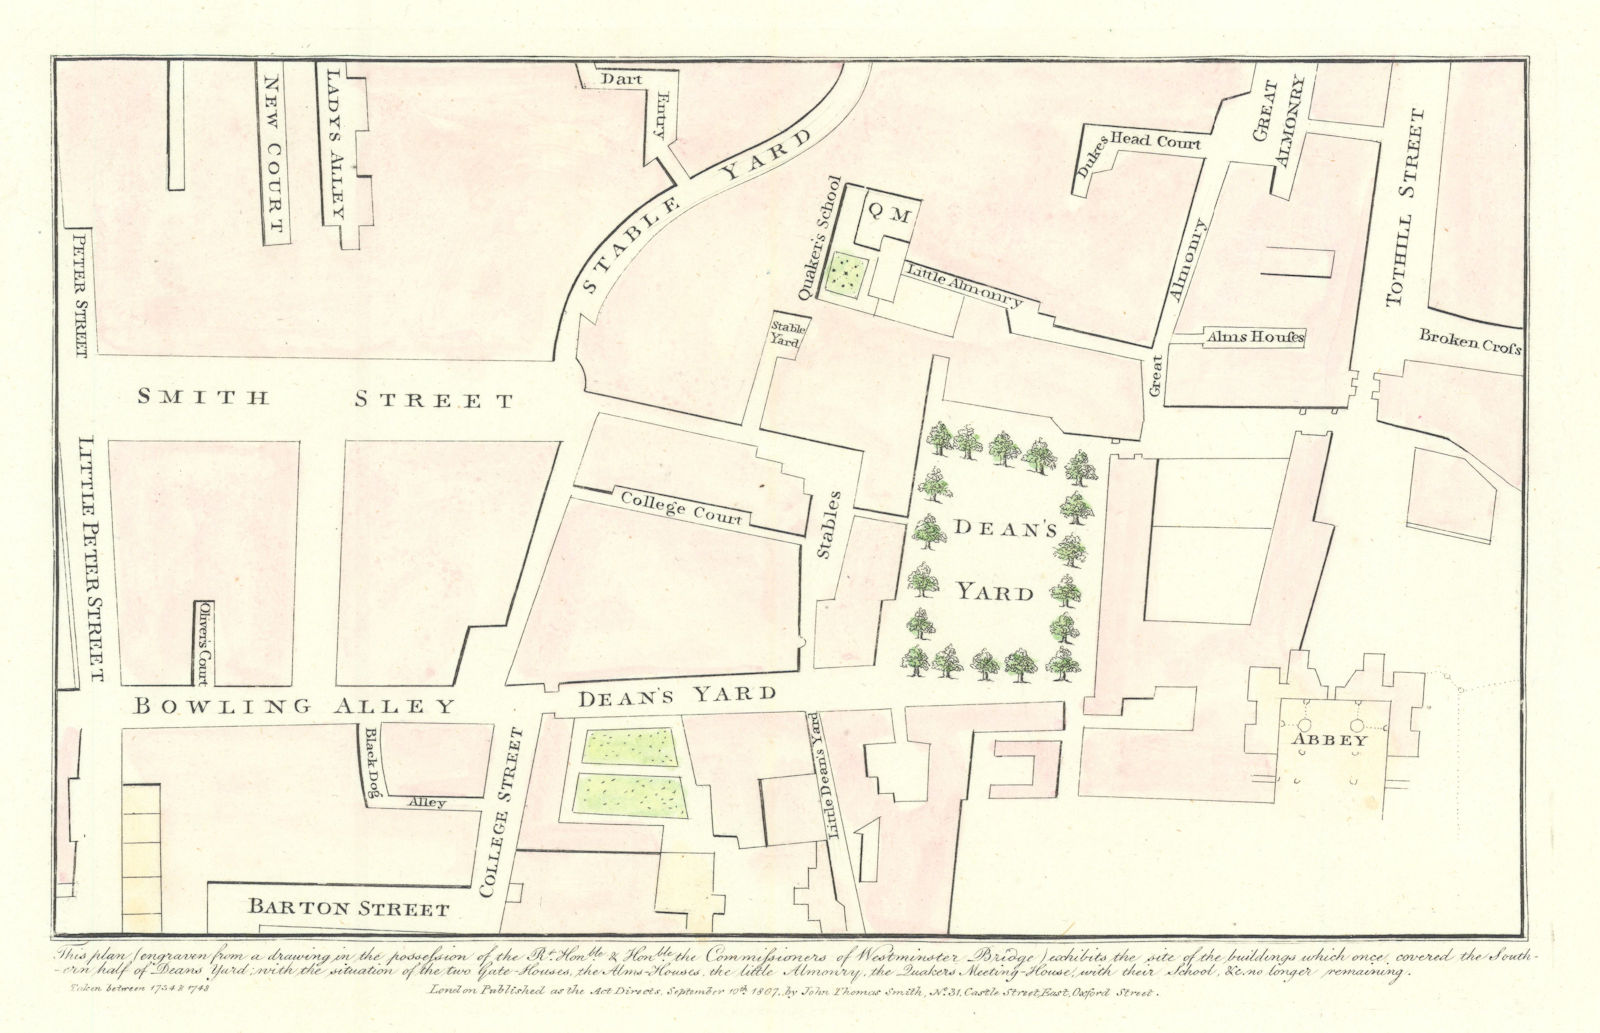 Plan of Dean's Yard, Smith Street & Westminster Abbey, 1734. J.T. SMITH 1807 map